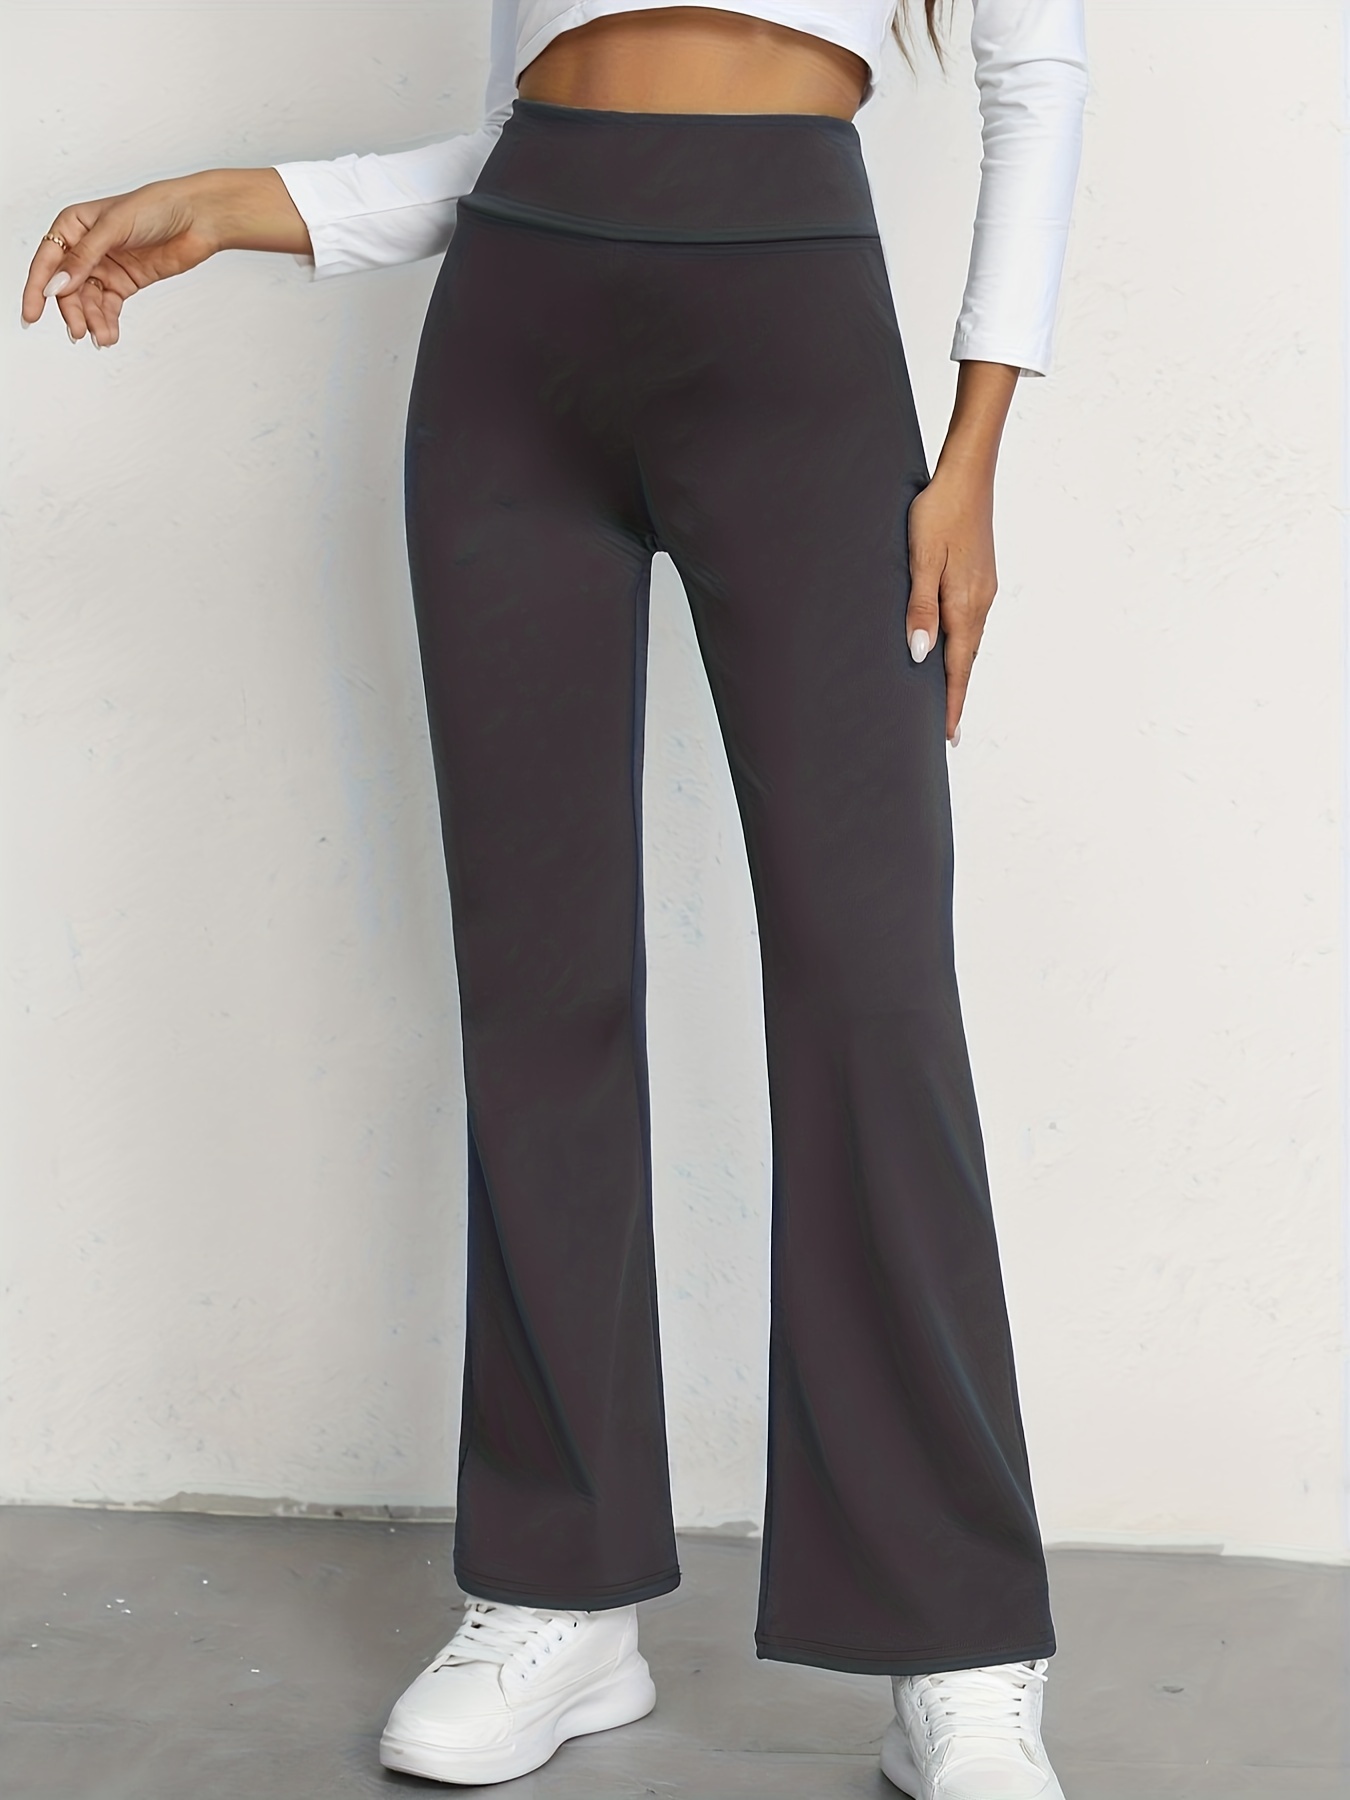 About A Girl Flare Casual Pants